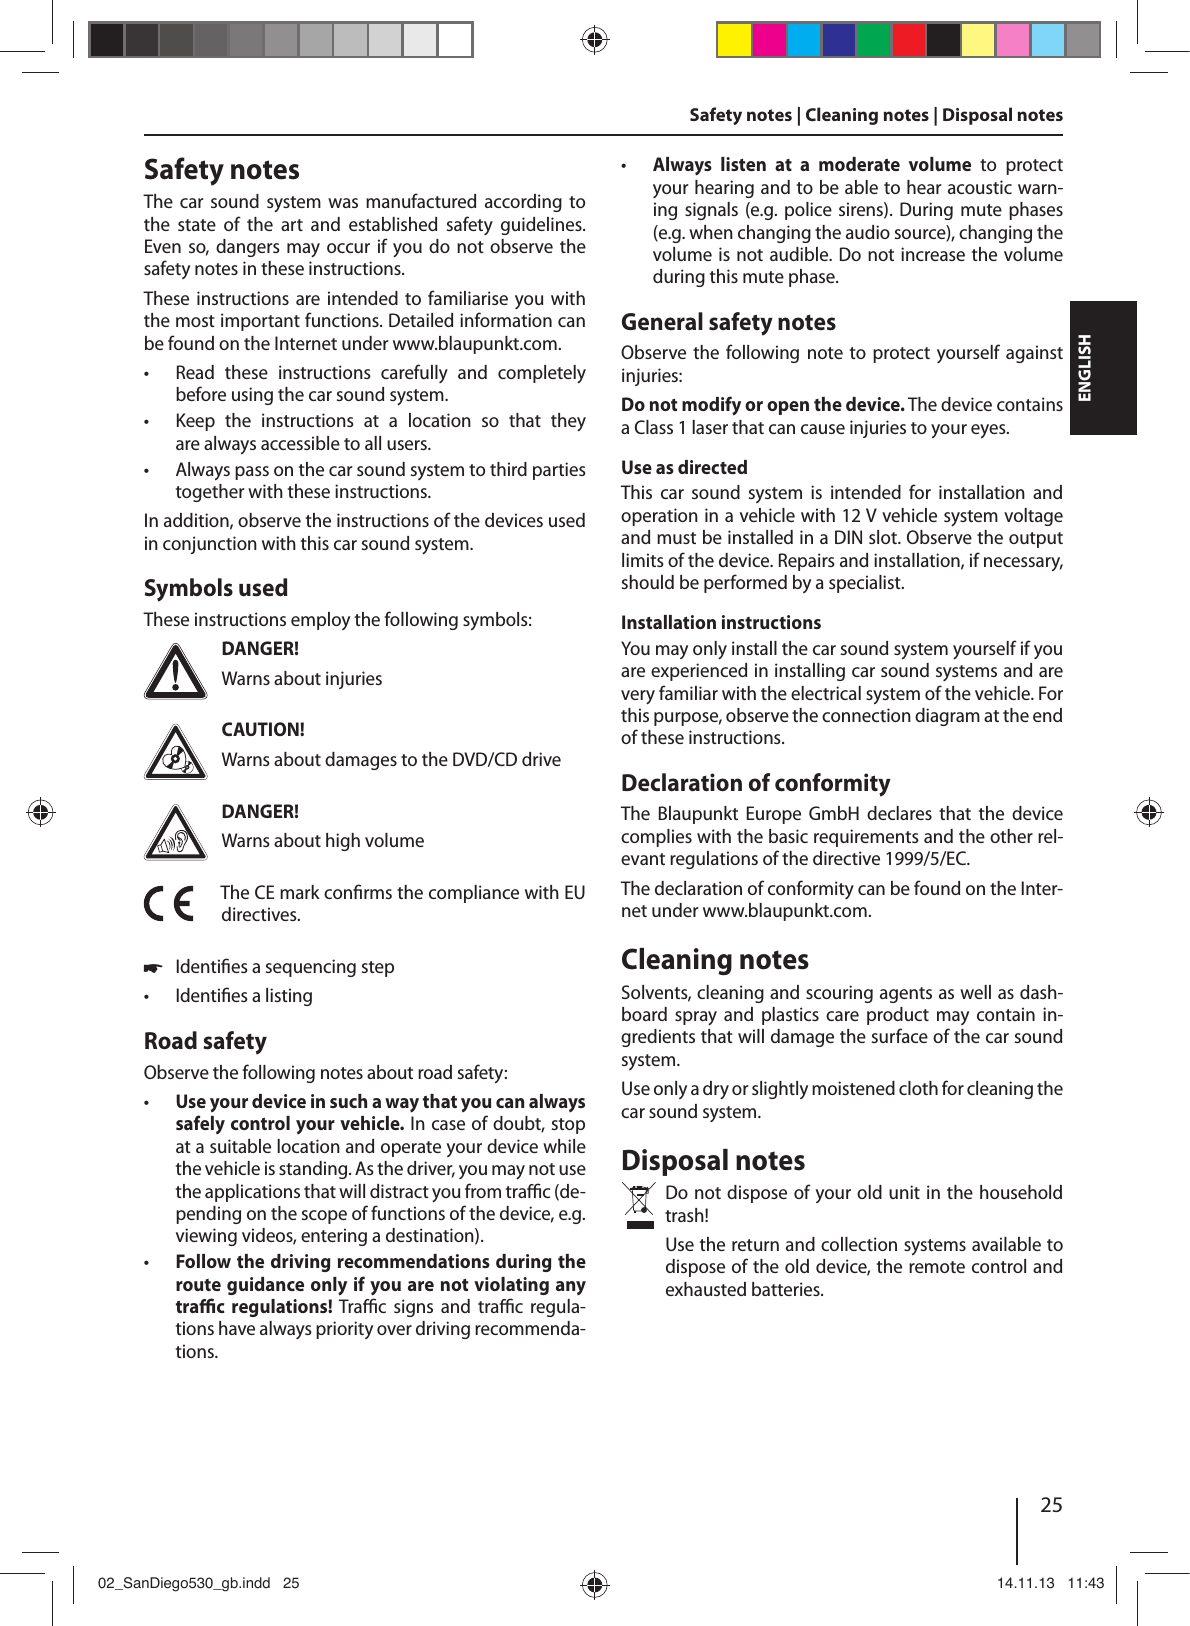 25DEUTSCHENGLISHSafety notes | Cleaning notes | Disposal notesSafety notesThe  car  sound  system  was  manufactured  according  to the  state  of  the  art  and  established  safety  guidelines. Even so,  dangers may occur  if  you do not  observe  the safety notes in these instructions.These instructions  are intended to familiarise  you with the most important functions. Detailed information can be found on the Internet under www.blaupunkt.com. • Read  these  instructions  carefully  and  completely before using the car sound system. •Keep the instructions at a location so that they are always accessible to all users. • Always pass on the car sound system to third parties together with these instructions.In addition, observe the instructions of the devices used in conjunction with this car sound system.Symbols usedThese instructions employ the following symbols:DANGER!Warns about injuriesCAUTION!Warns about damages to the DVD/CD driveDANGER!Warns about high volumeThe CE mark con rms the compliance with EU directives. !Identi es a sequencing step •Identi es a listingRoad safetyObserve the following notes about road safety: • Use your device in such a way that you can always safely control your vehicle. In case of doubt, stop at a suitable location and operate your device while the vehicle is standing. As the driver, you may not use the applications that will distract you from tra  c (de-pending on the scope of functions of the device, e.g. viewing videos, entering a destination). • Follow the driving recommendations during the route guidance only if you are not violating any tra  c  regulations! Tra  c  signs  and  tra  c  regula-tions have always priority over driving recommenda-tions.  • Always  listen  at  a  moderate  volume  to  protect your hearing and to be able to hear acoustic warn-ing signals (e.g. police sirens). During mute phases (e.g. when changing the audio source), changing the volume is not audible. Do not increase the volume during this mute phase.General safety notesObserve  the following note to protect  yourself against injuries:Do not modify or open the device. The device contains a Class 1 laser that can cause injuries to your eyes.Use as directedThis  car  sound  system  is  intended  for  installation  and operation in a vehicle with 12 V vehicle system voltage and must be installed in a DIN slot. Observe the output limits of the device. Repairs and installation, if necessary, should be performed by a specialist.Installation instructionsYou may only install the car sound system yourself if you are experienced in installing car sound systems and are very familiar with the electrical system of the vehicle. For this purpose, observe the connection diagram at the end of these instructions.Declaration of conformityThe  Blaupunkt  Europe  GmbH  declares  that  the  device complies with the basic requirements and the other rel-evant regulations of the directive 1999/5/EC.The declaration of conformity can be found on the Inter-net under www.blaupunkt.com.Cleaning notesSolvents, cleaning and scouring agents as well as dash-board  spray  and  plastics  care  product  may  contain  in-gredients that will damage the surface of the car sound system.Use only a dry or slightly moistened cloth for cleaning the car sound system.Disposal notesDo not dispose of your old unit in the household trash! Use the return and collection systems available to dispose of the old device, the remote control and exhausted batteries.02_SanDiego530_gb.indd   2502_SanDiego530_gb.indd   25 14.11.13   11:4314.11.13   11:43